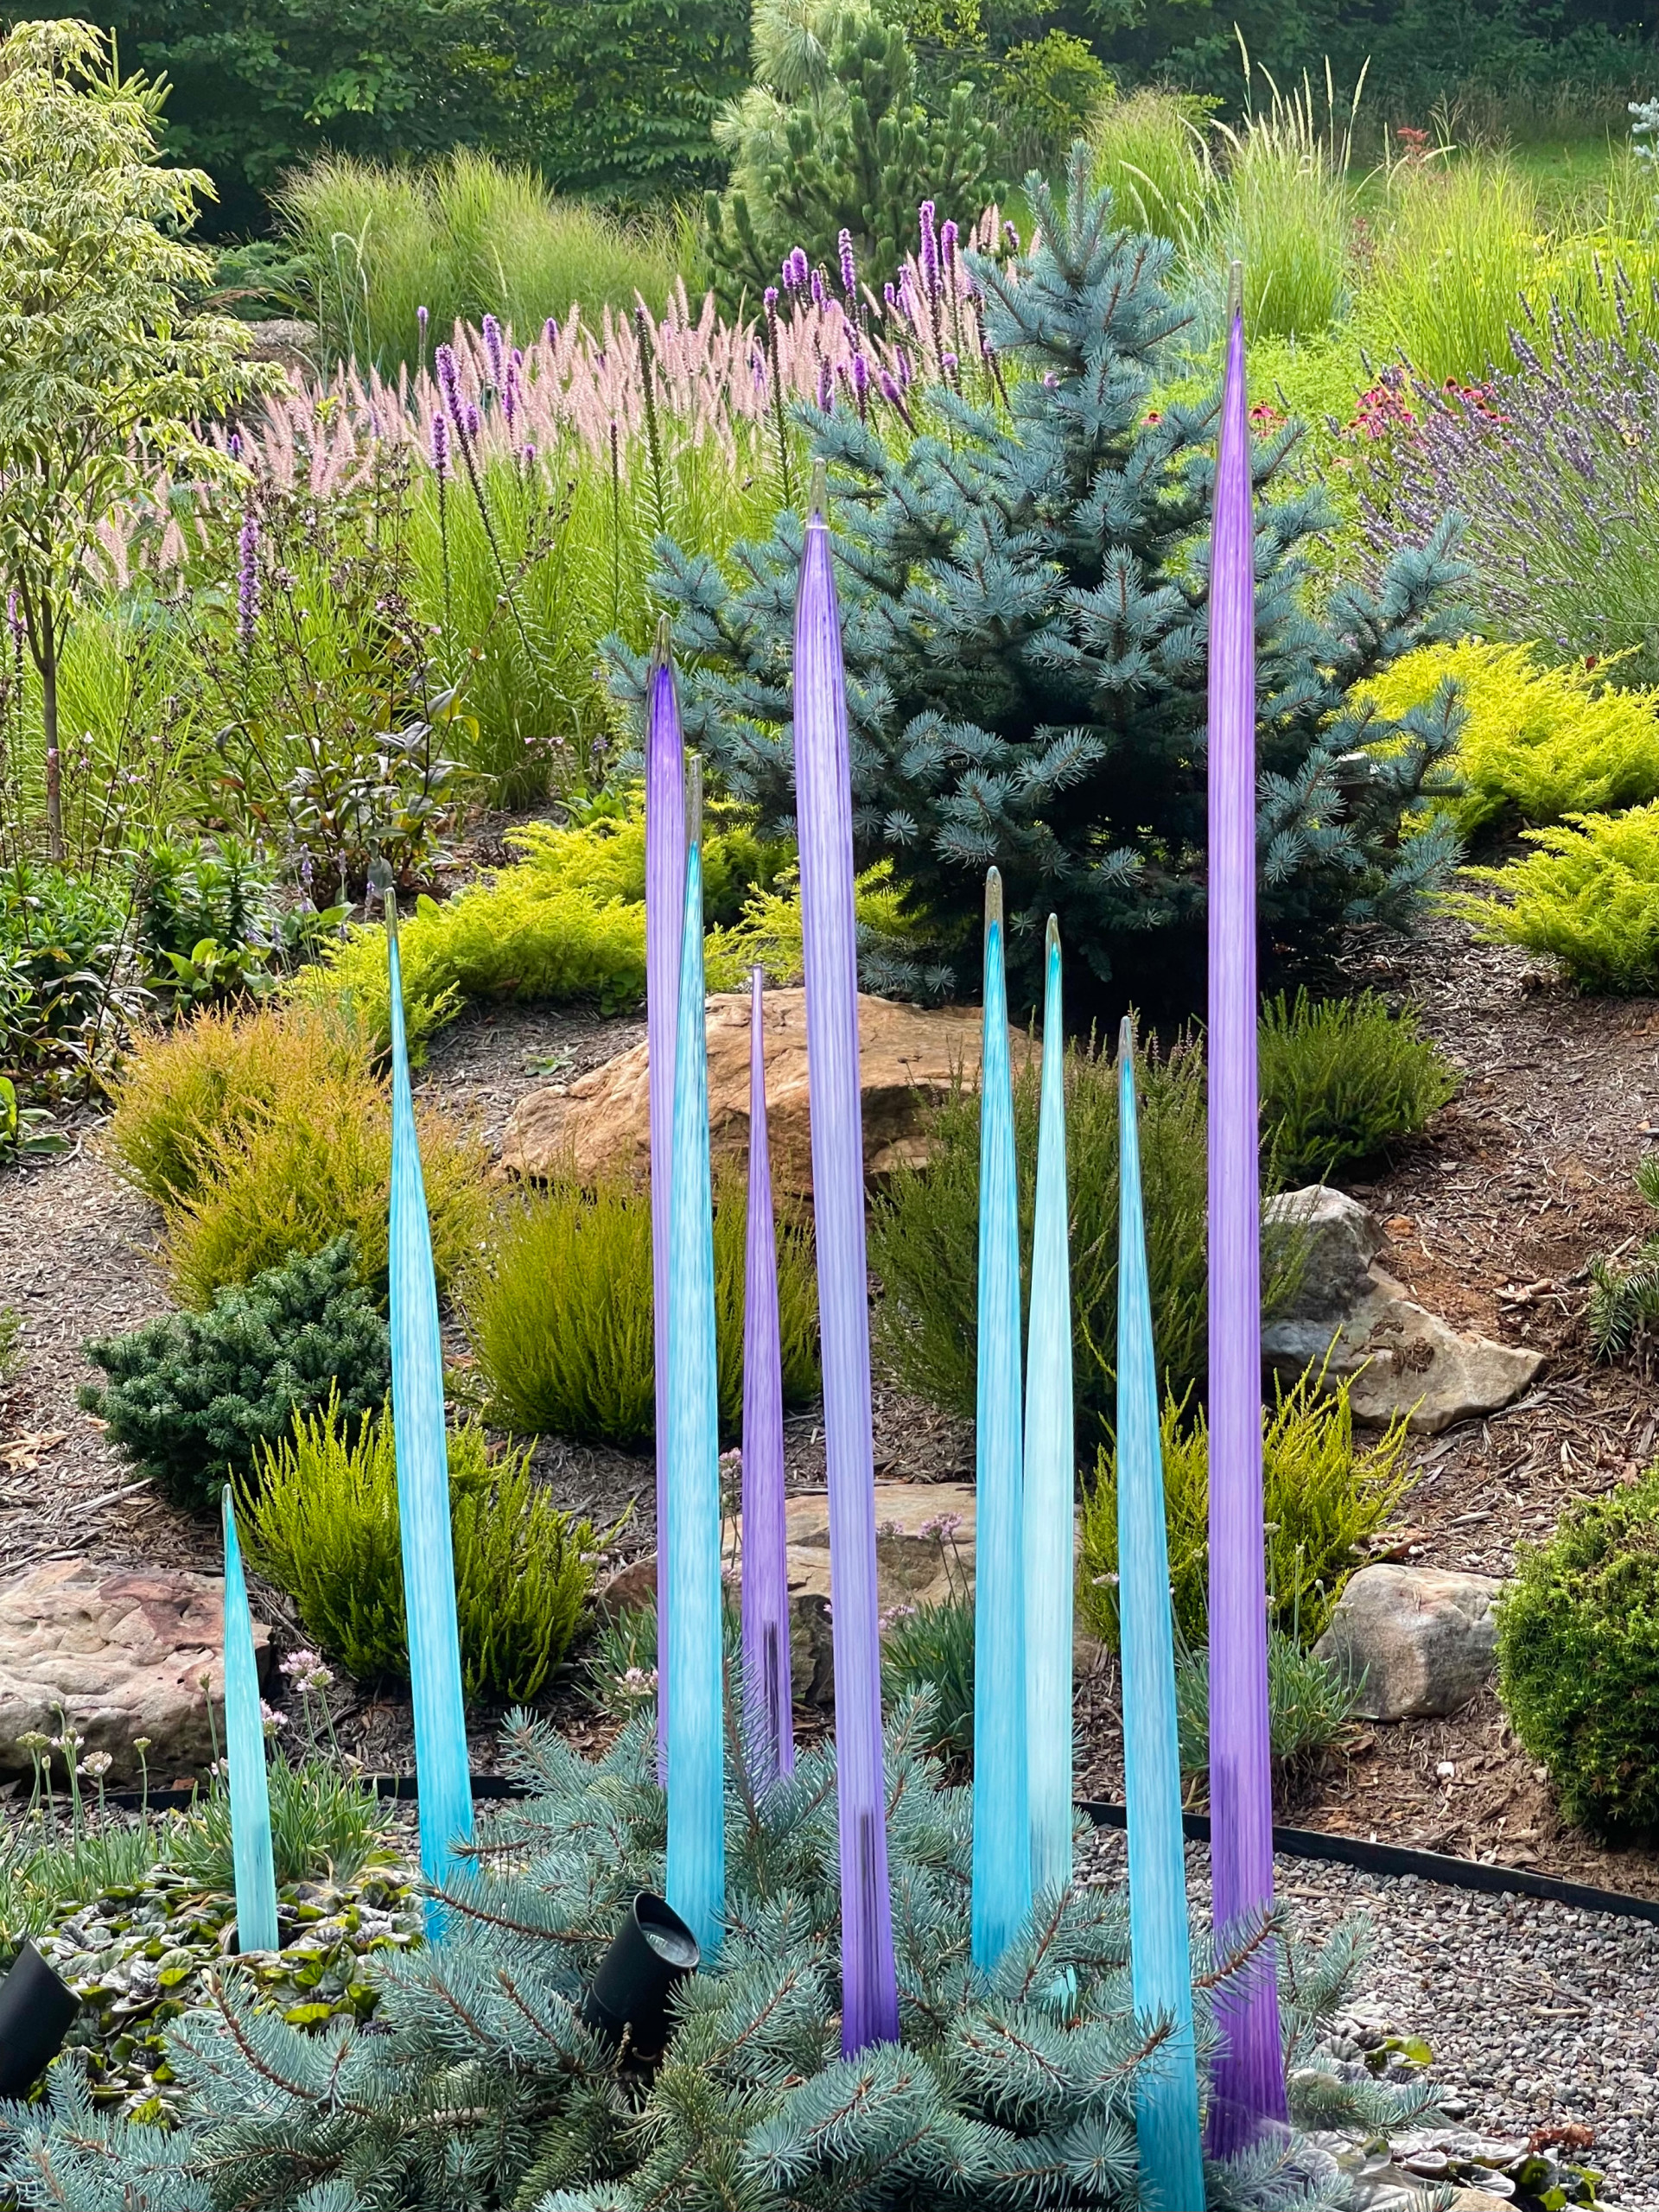 Glass spears and liatris